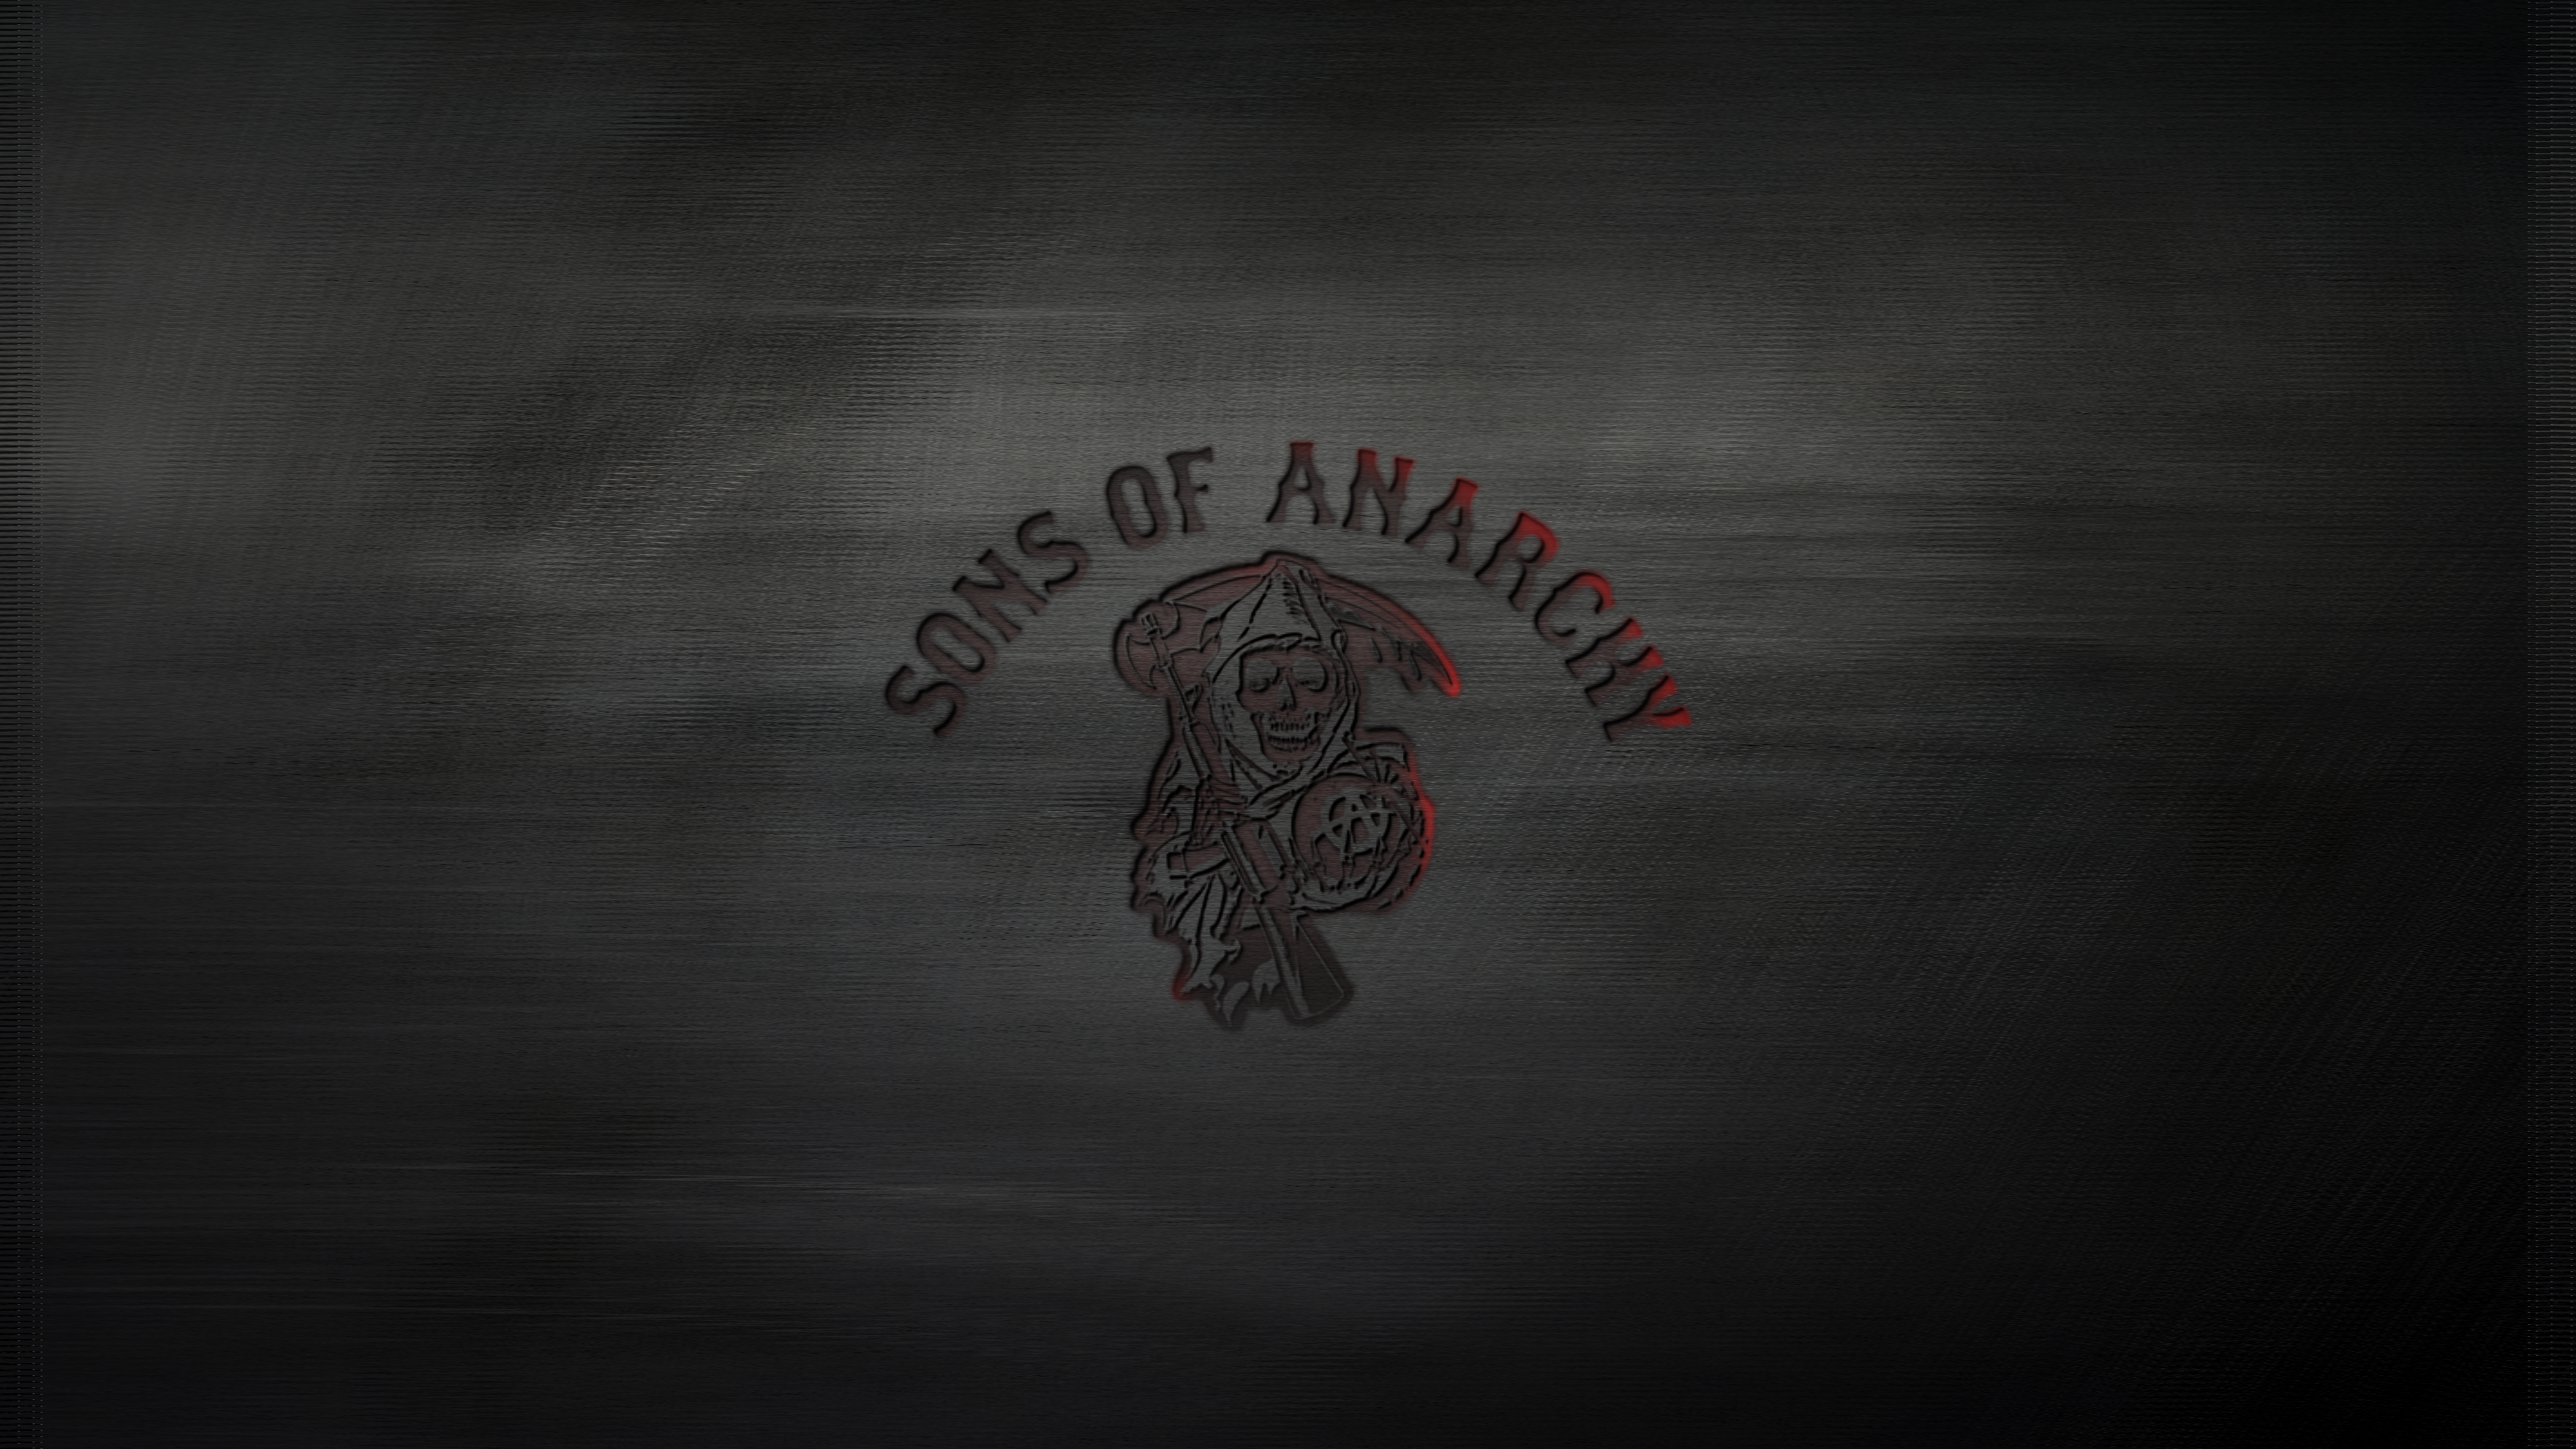 Sons Of Anarchy Pic Wallpapers